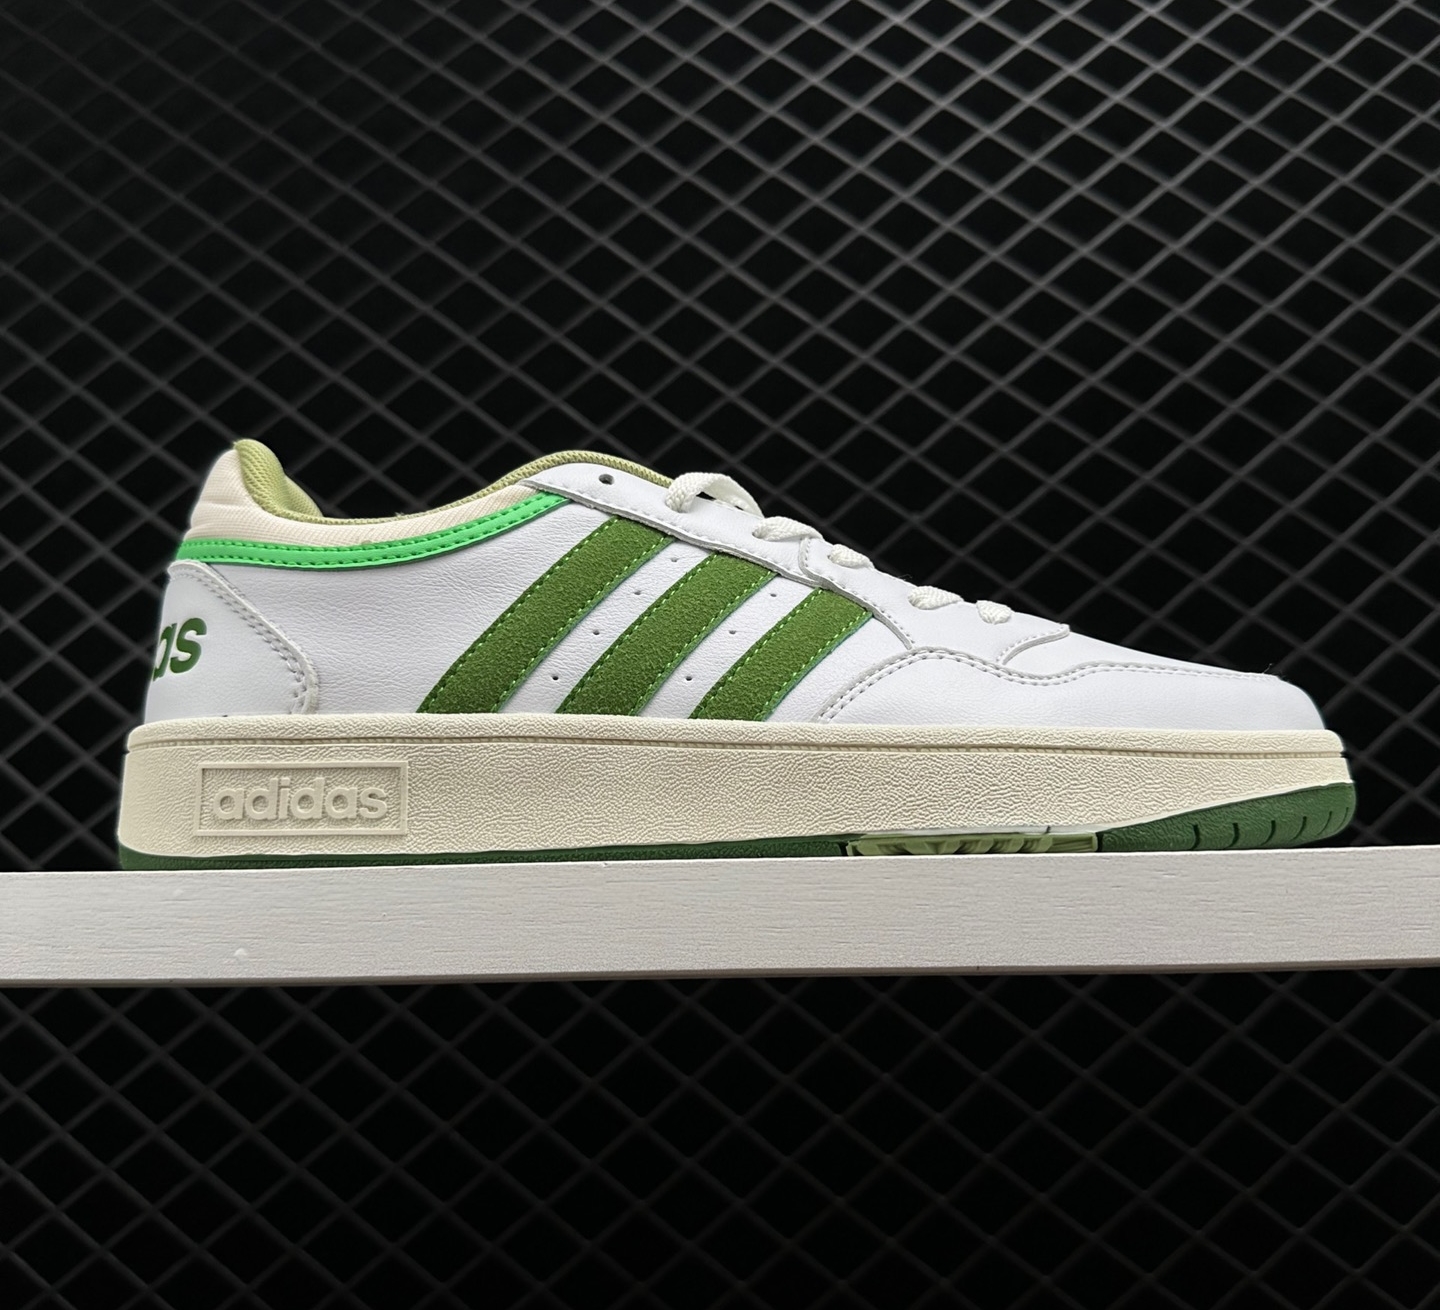 Adidas Neo Hoops 3.0 'White Green' GX9773 - Stylish and Sporty Footwear